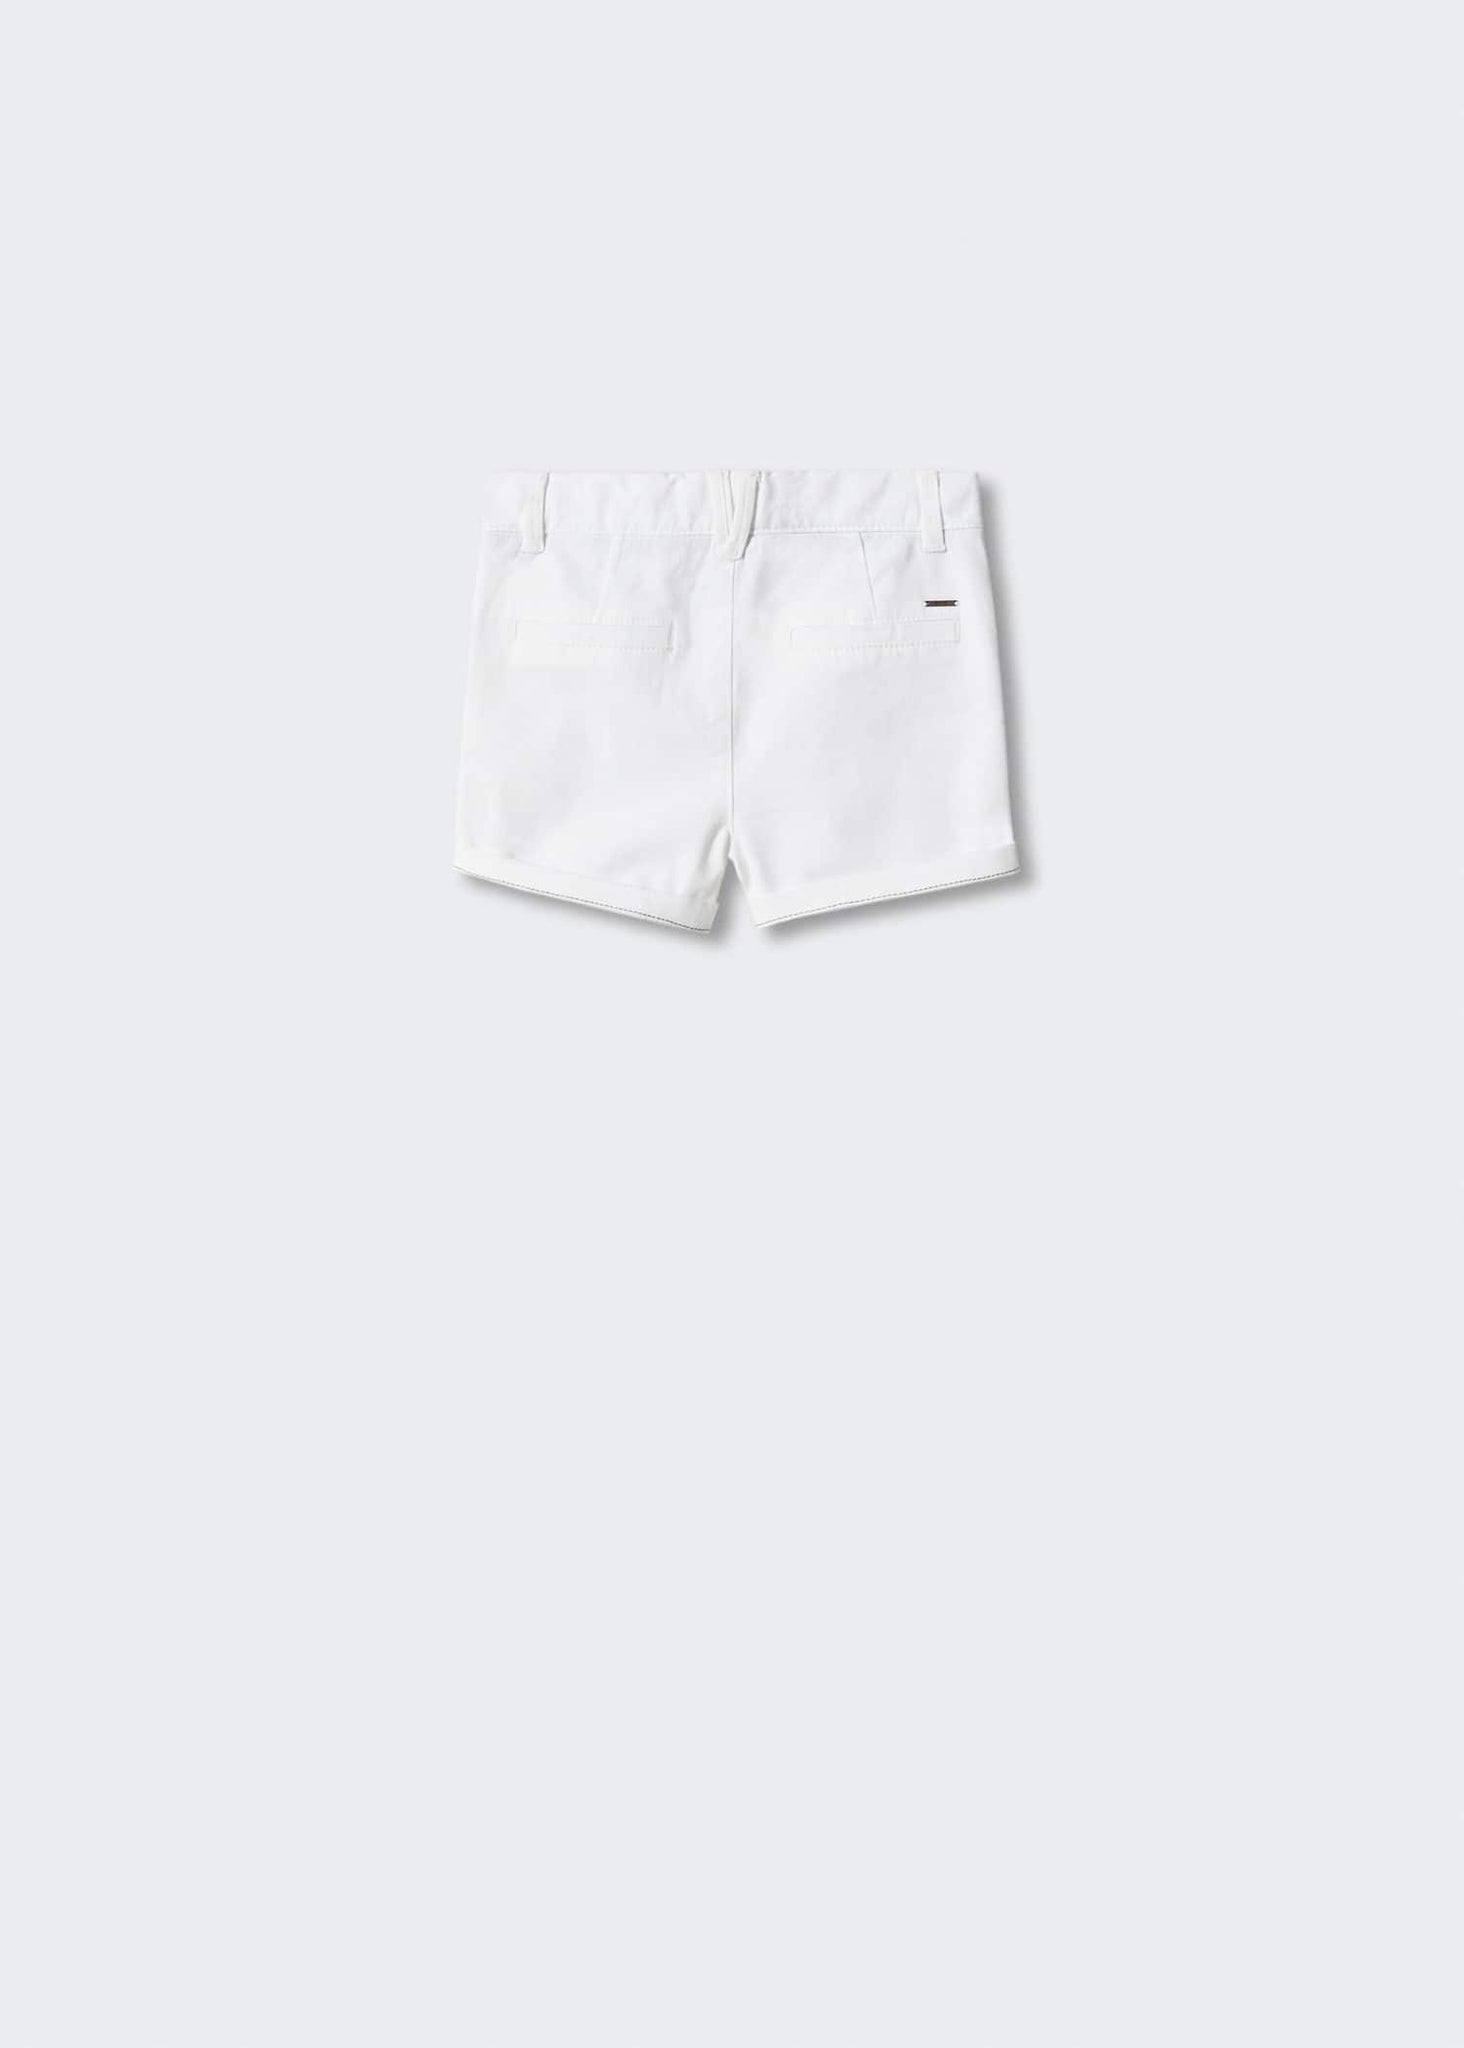 Cotton chino style Bermuda shorts - Reverse of the article